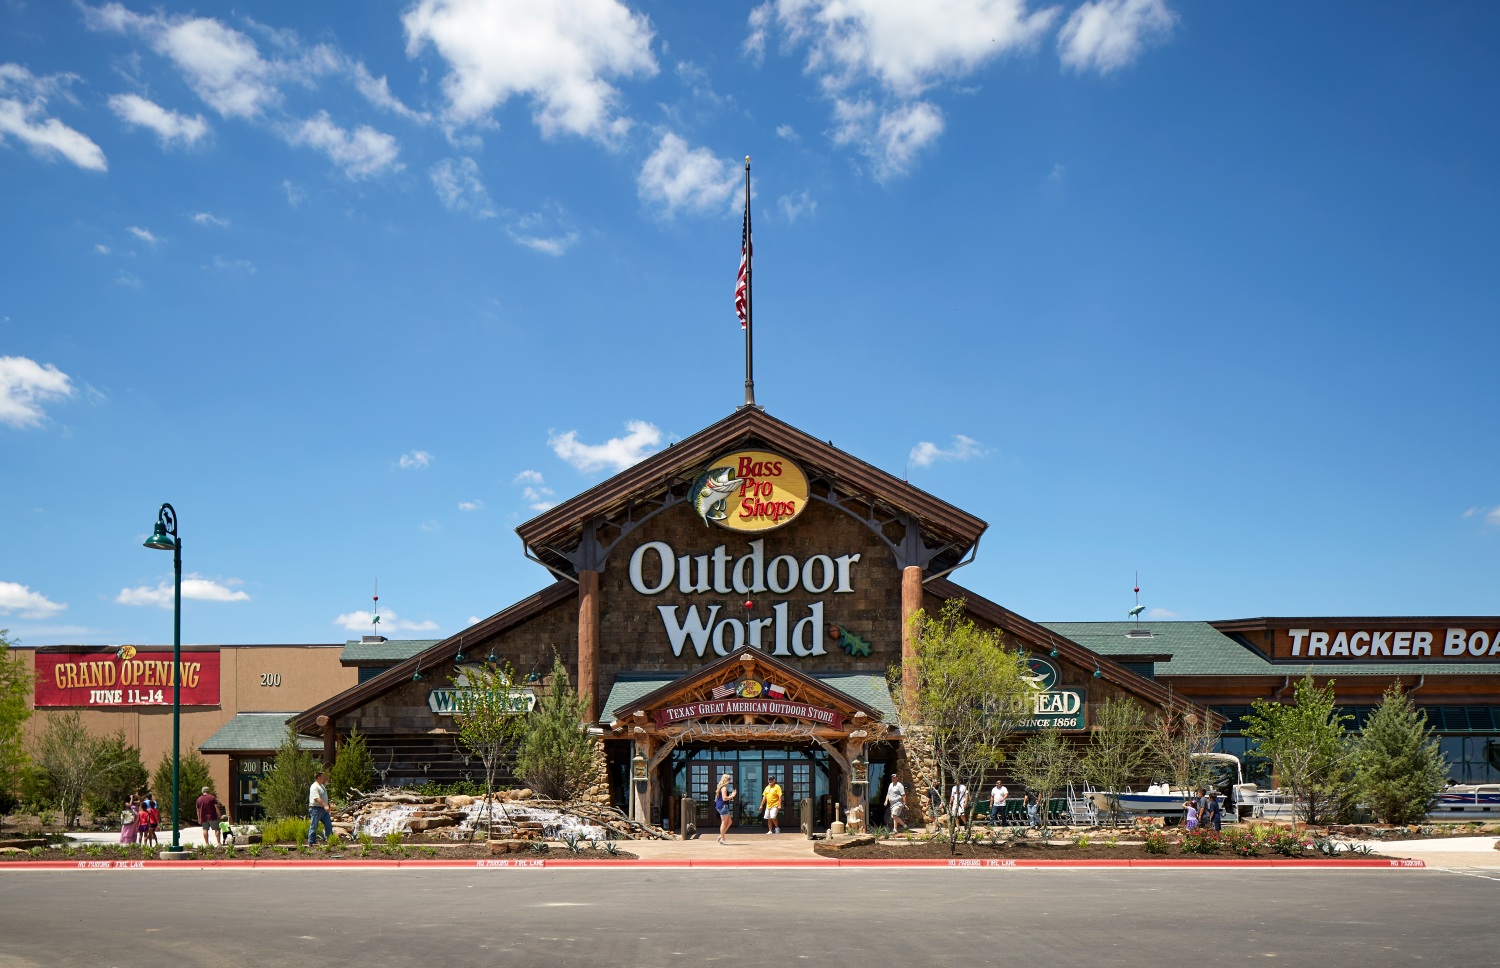 Bass Pro Shops Outdoor World - Whiting-Turner